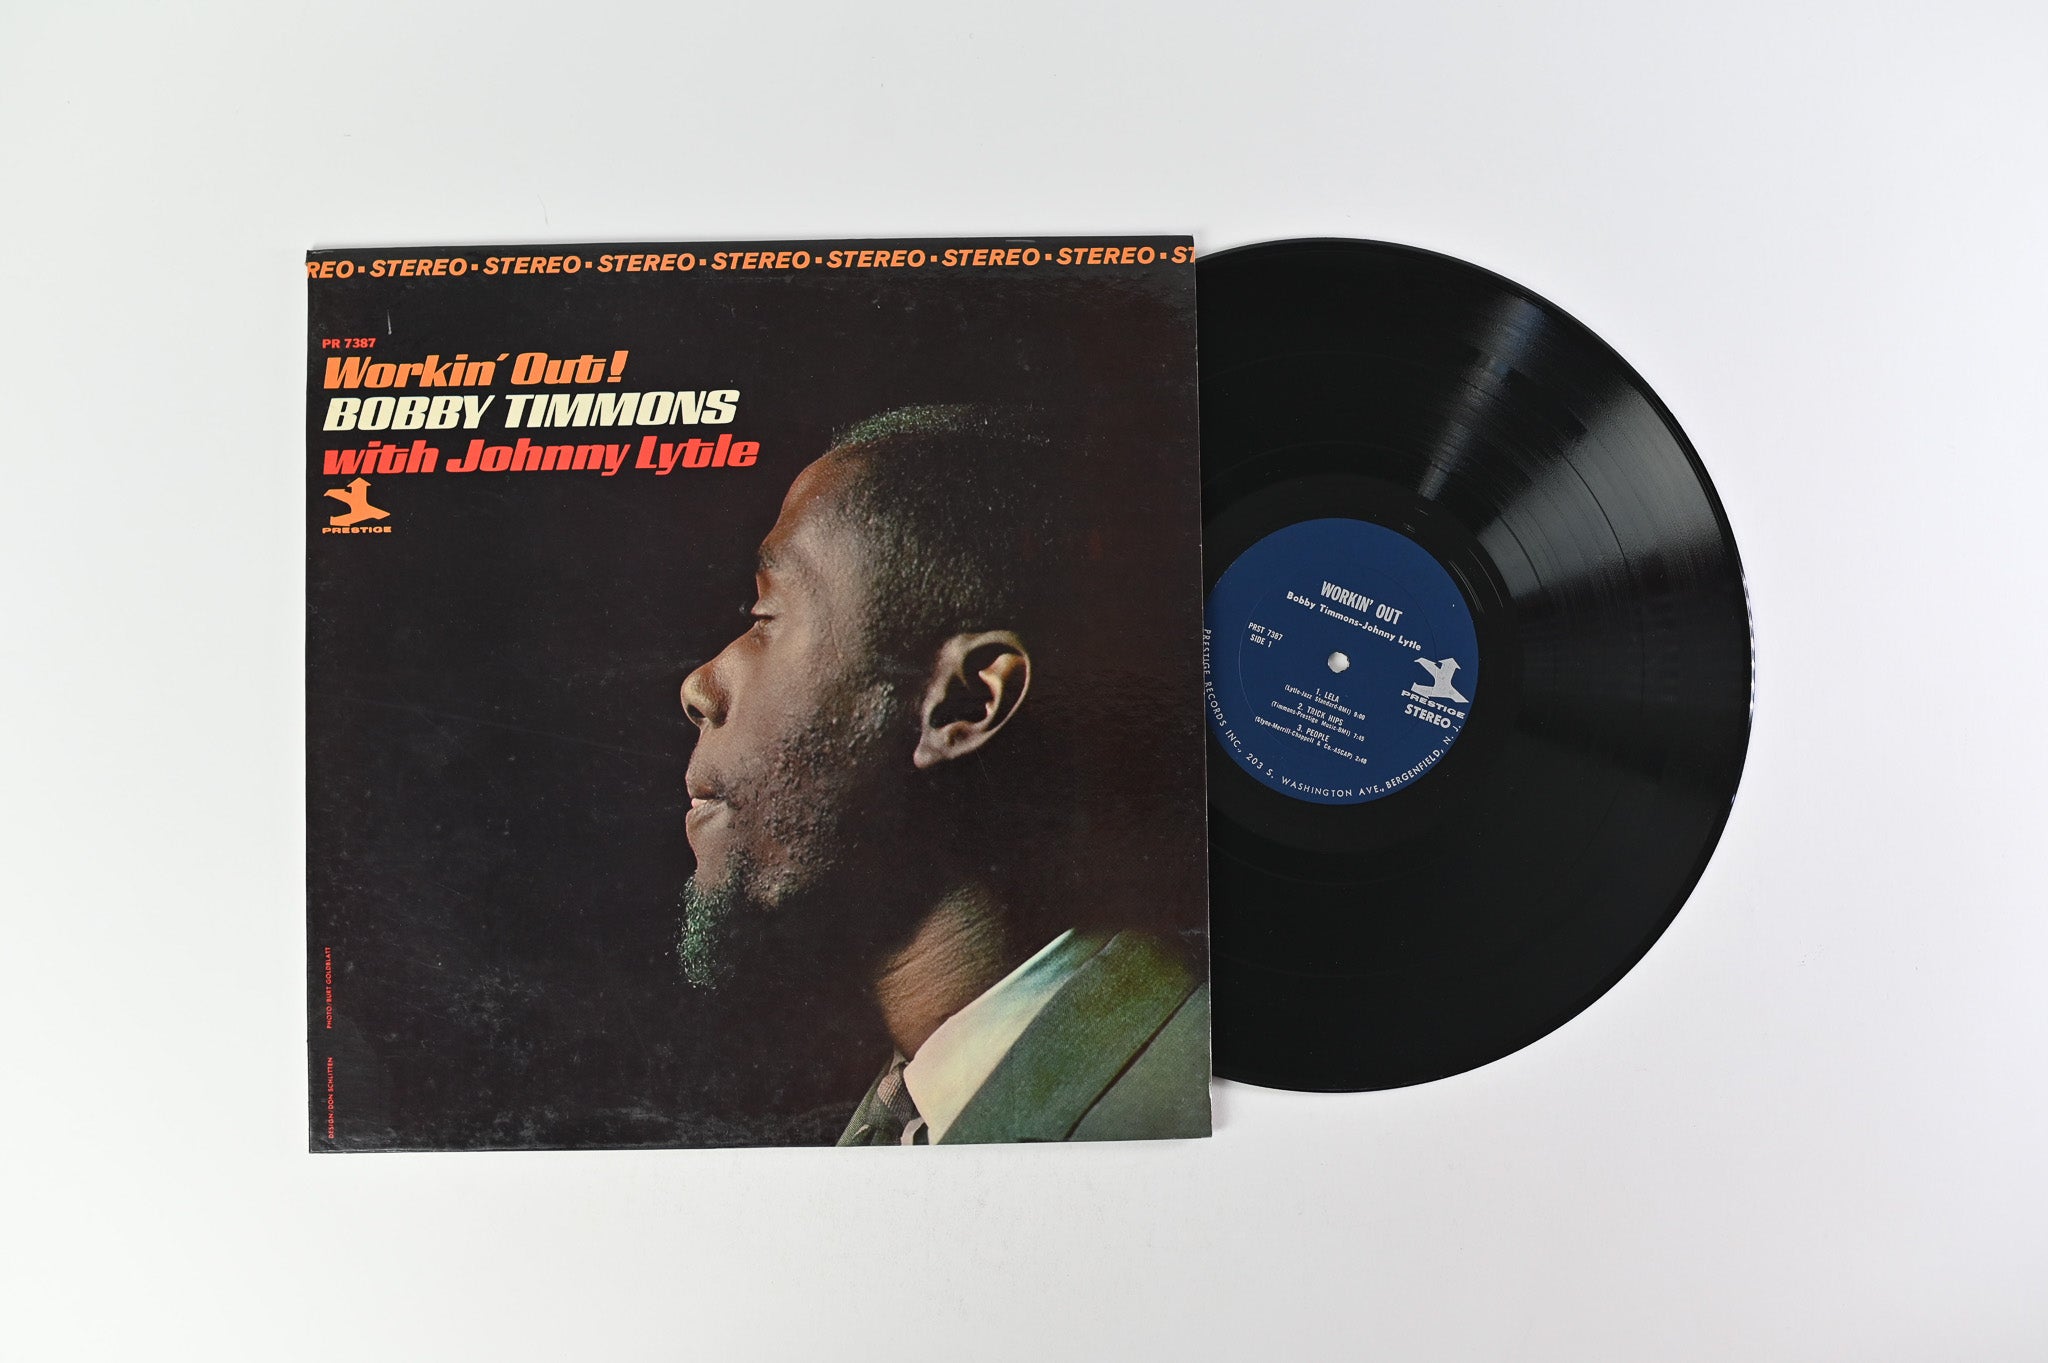 Bobby Timmons - Workin´ Out! on Prestige Stereo